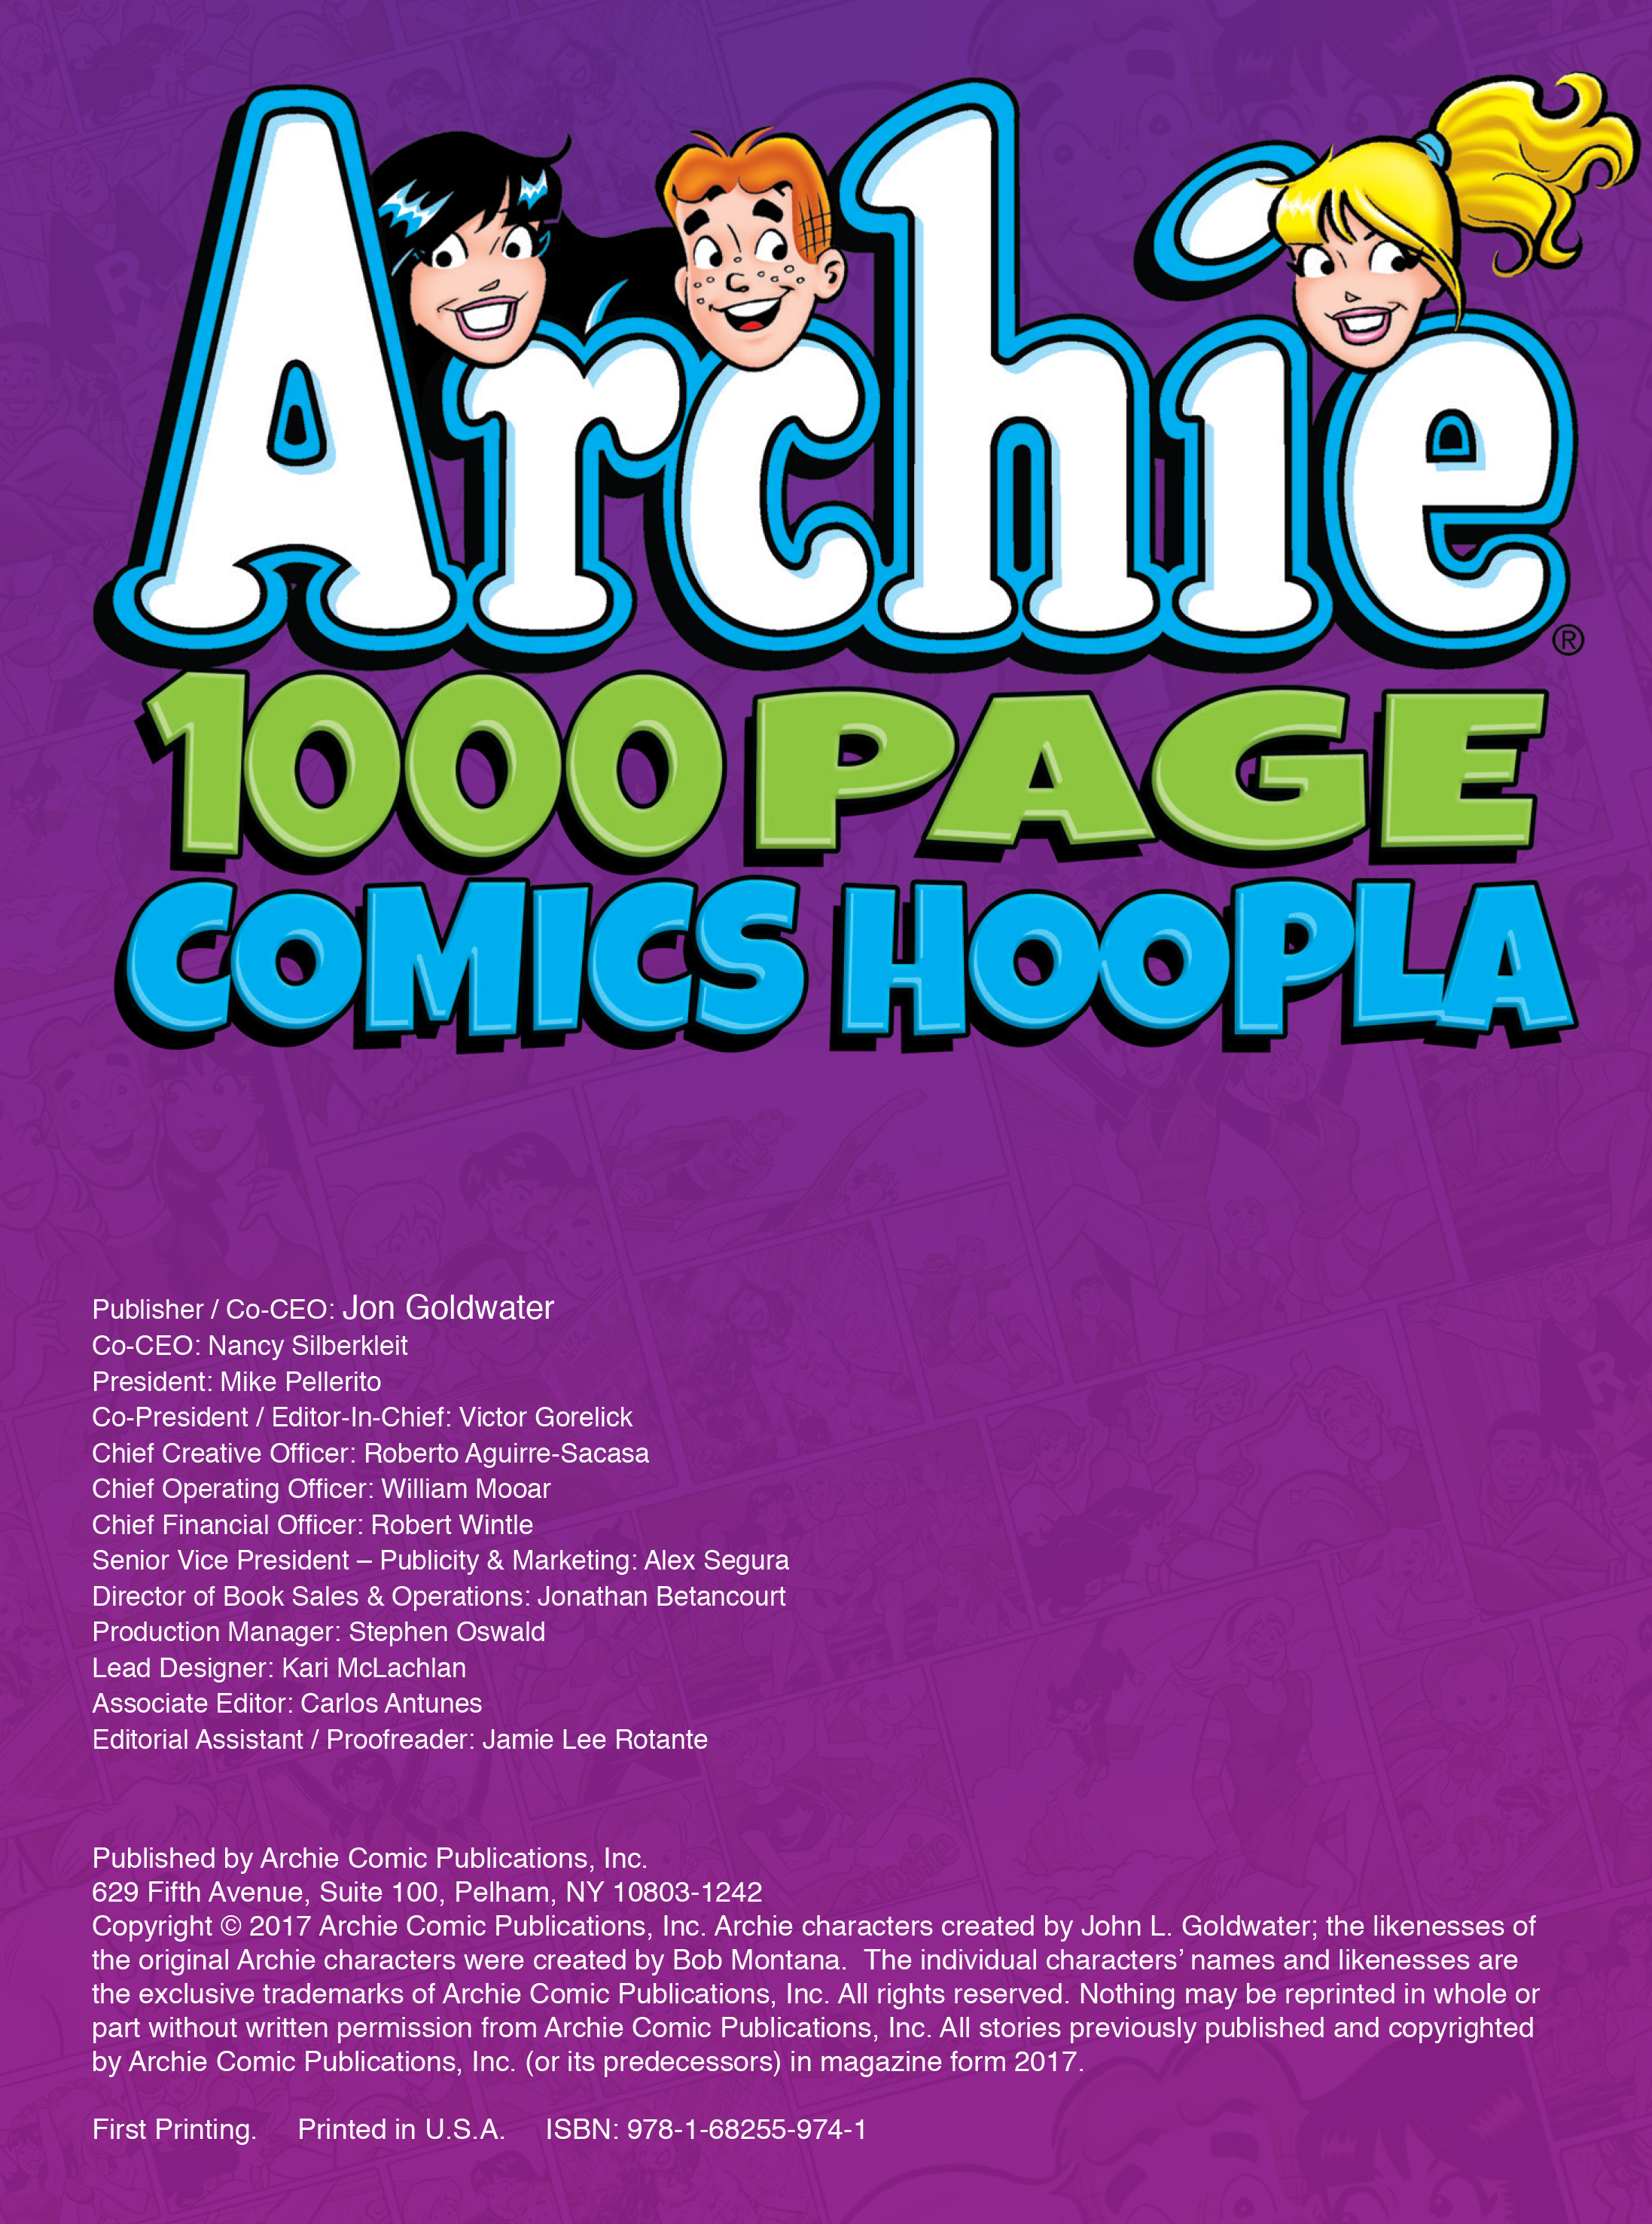 Read online Archie 1000 Page Comics Hoopla comic -  Issue # TPB (Part 1) - 3